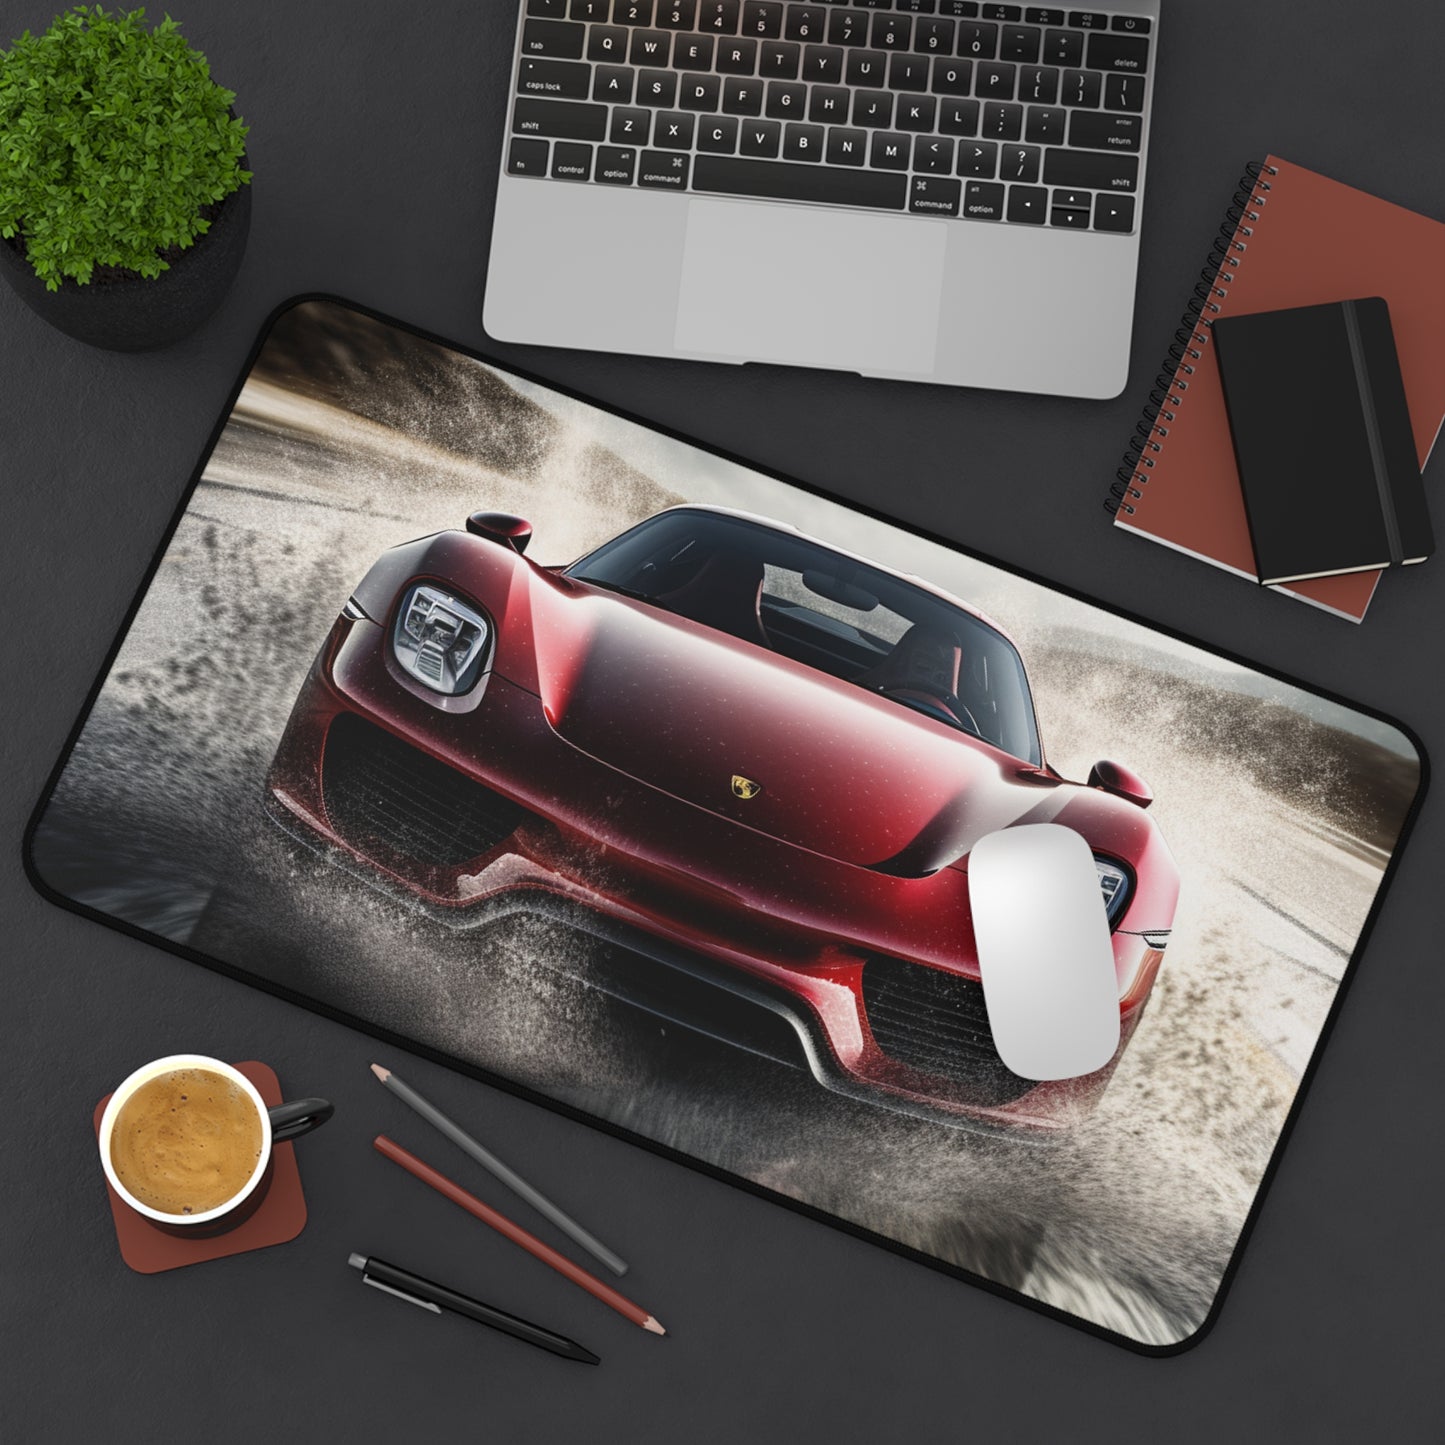 Desk Mat 918 Spyder with white background driving fast on water 4